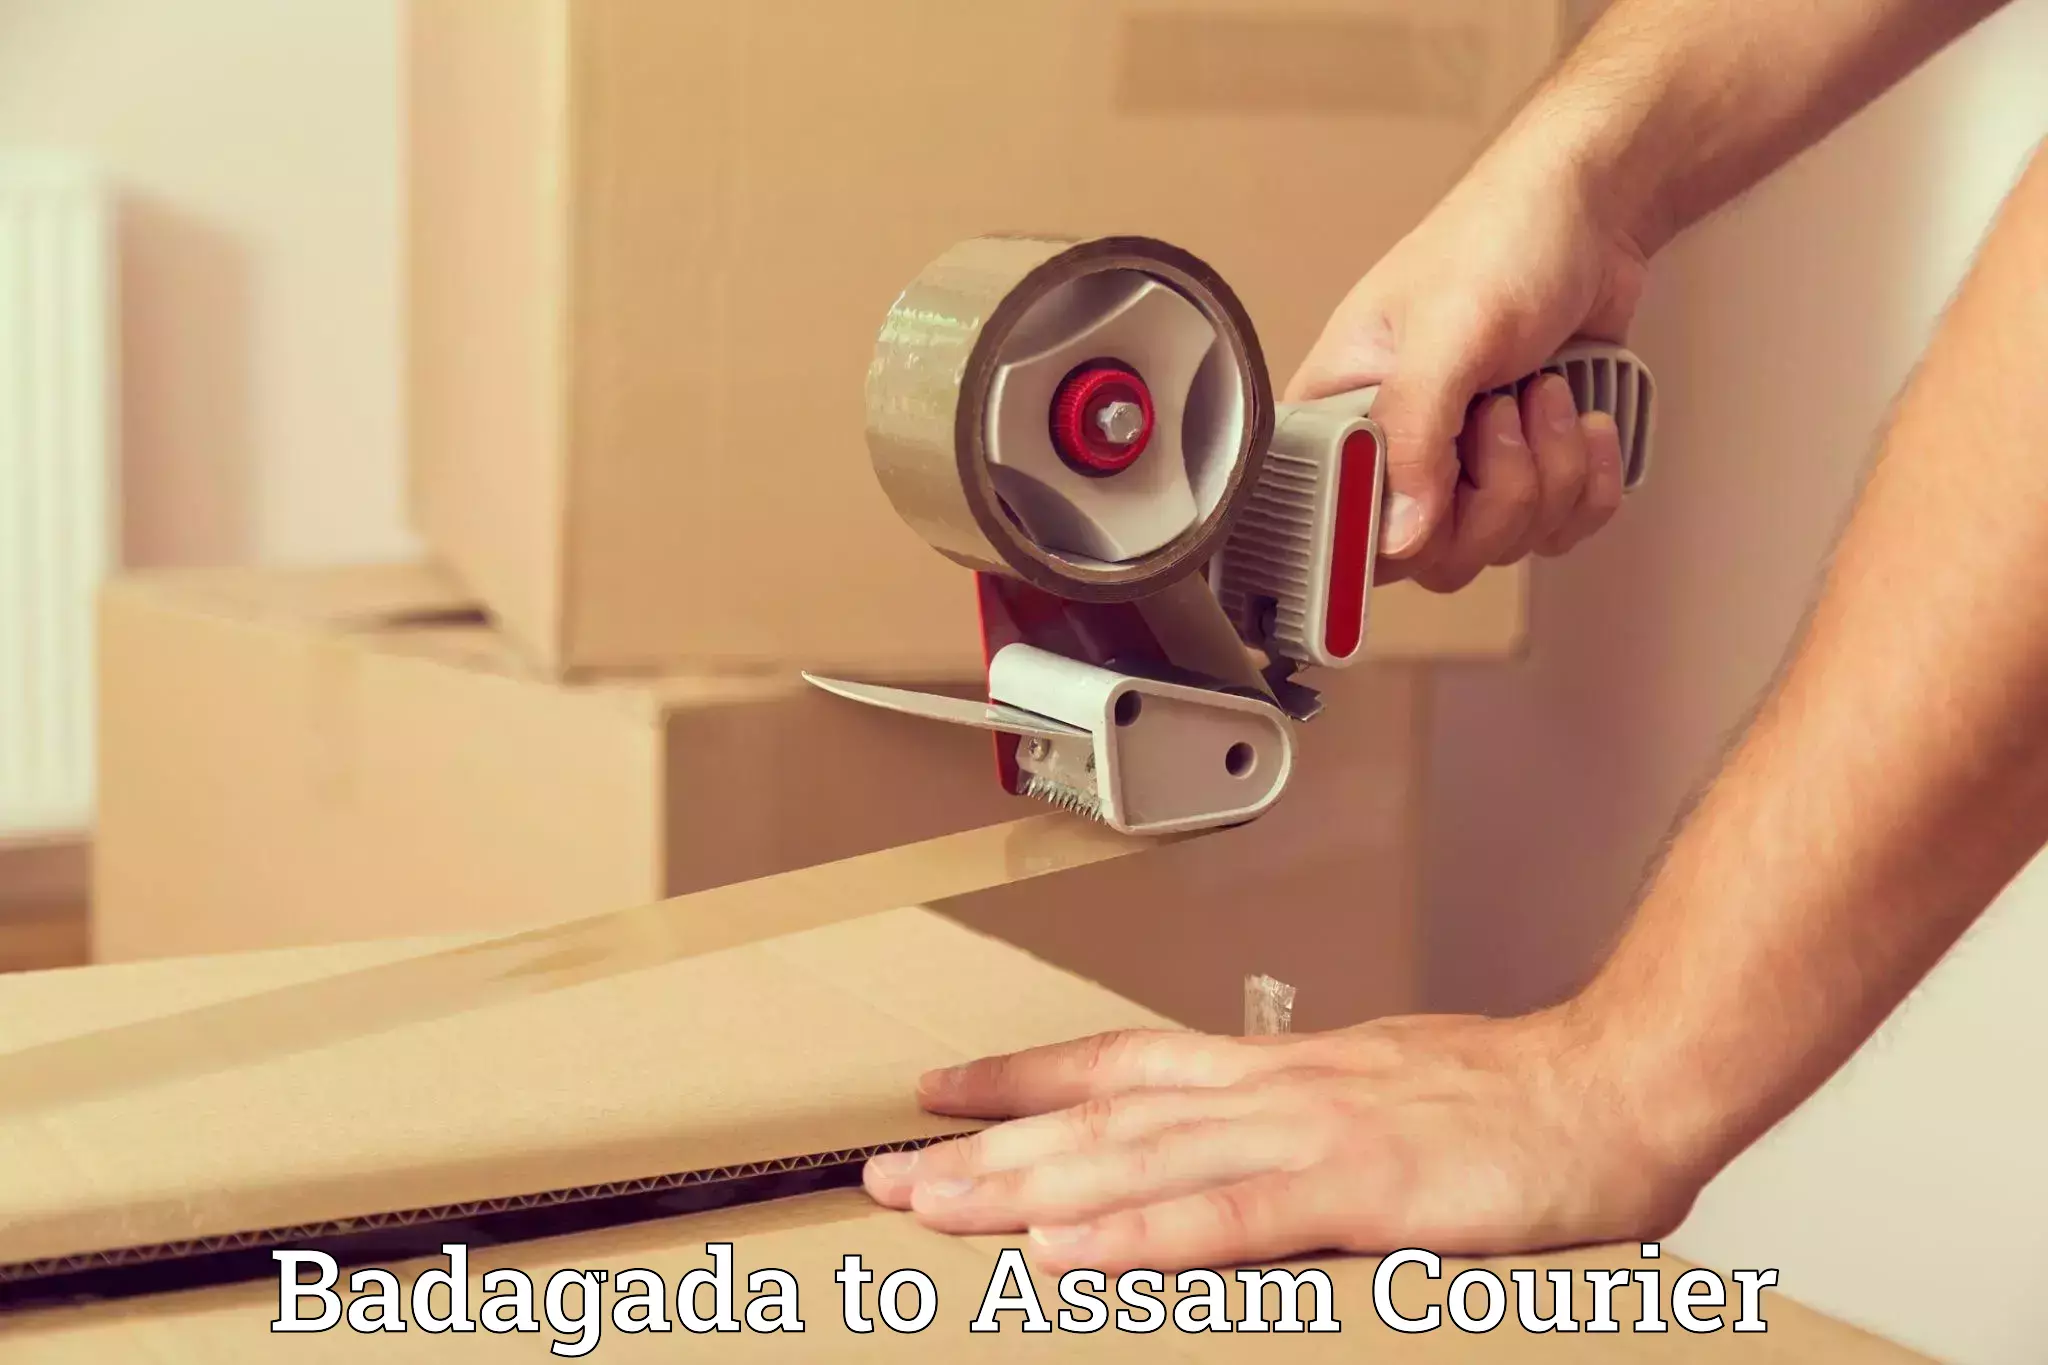 Efficient packing and moving in Badagada to Assam